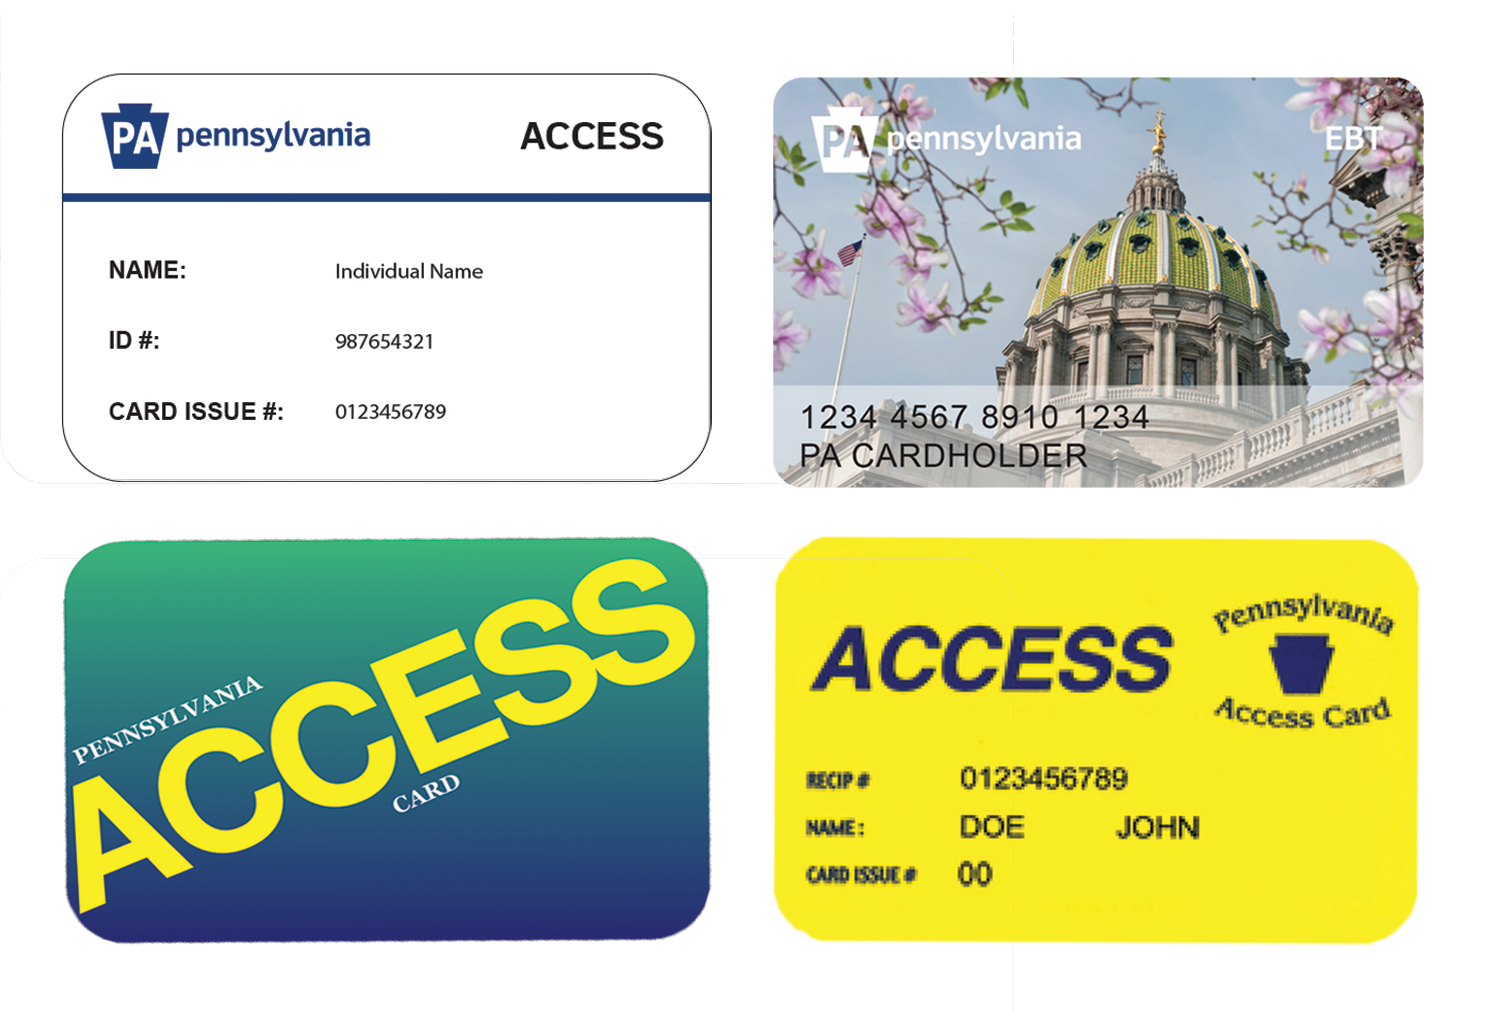 How to get 2 museum admission with your ACCESS or ArtReach ACCESS card